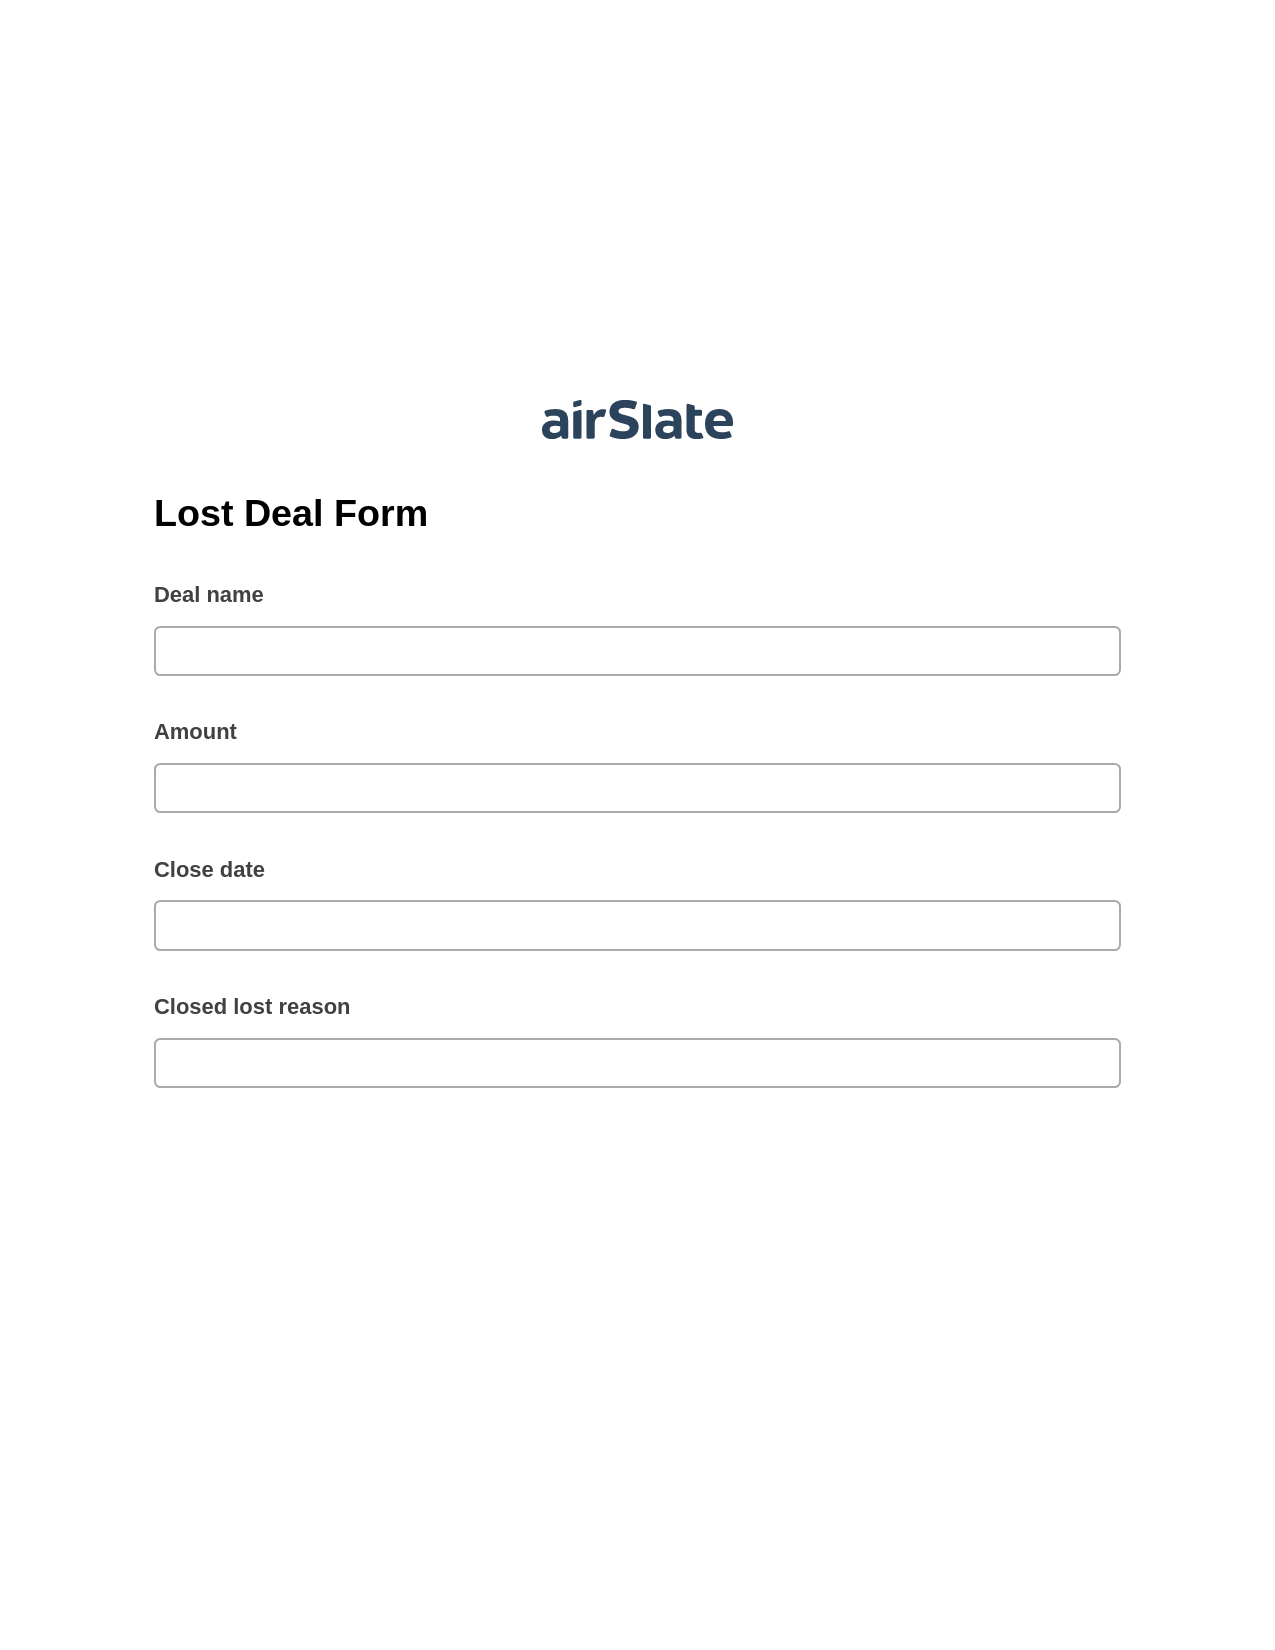 Lost Deal Form Pre-fill from MS Dynamics 365 Records, Remove Slate Bot, Export to NetSuite Bot